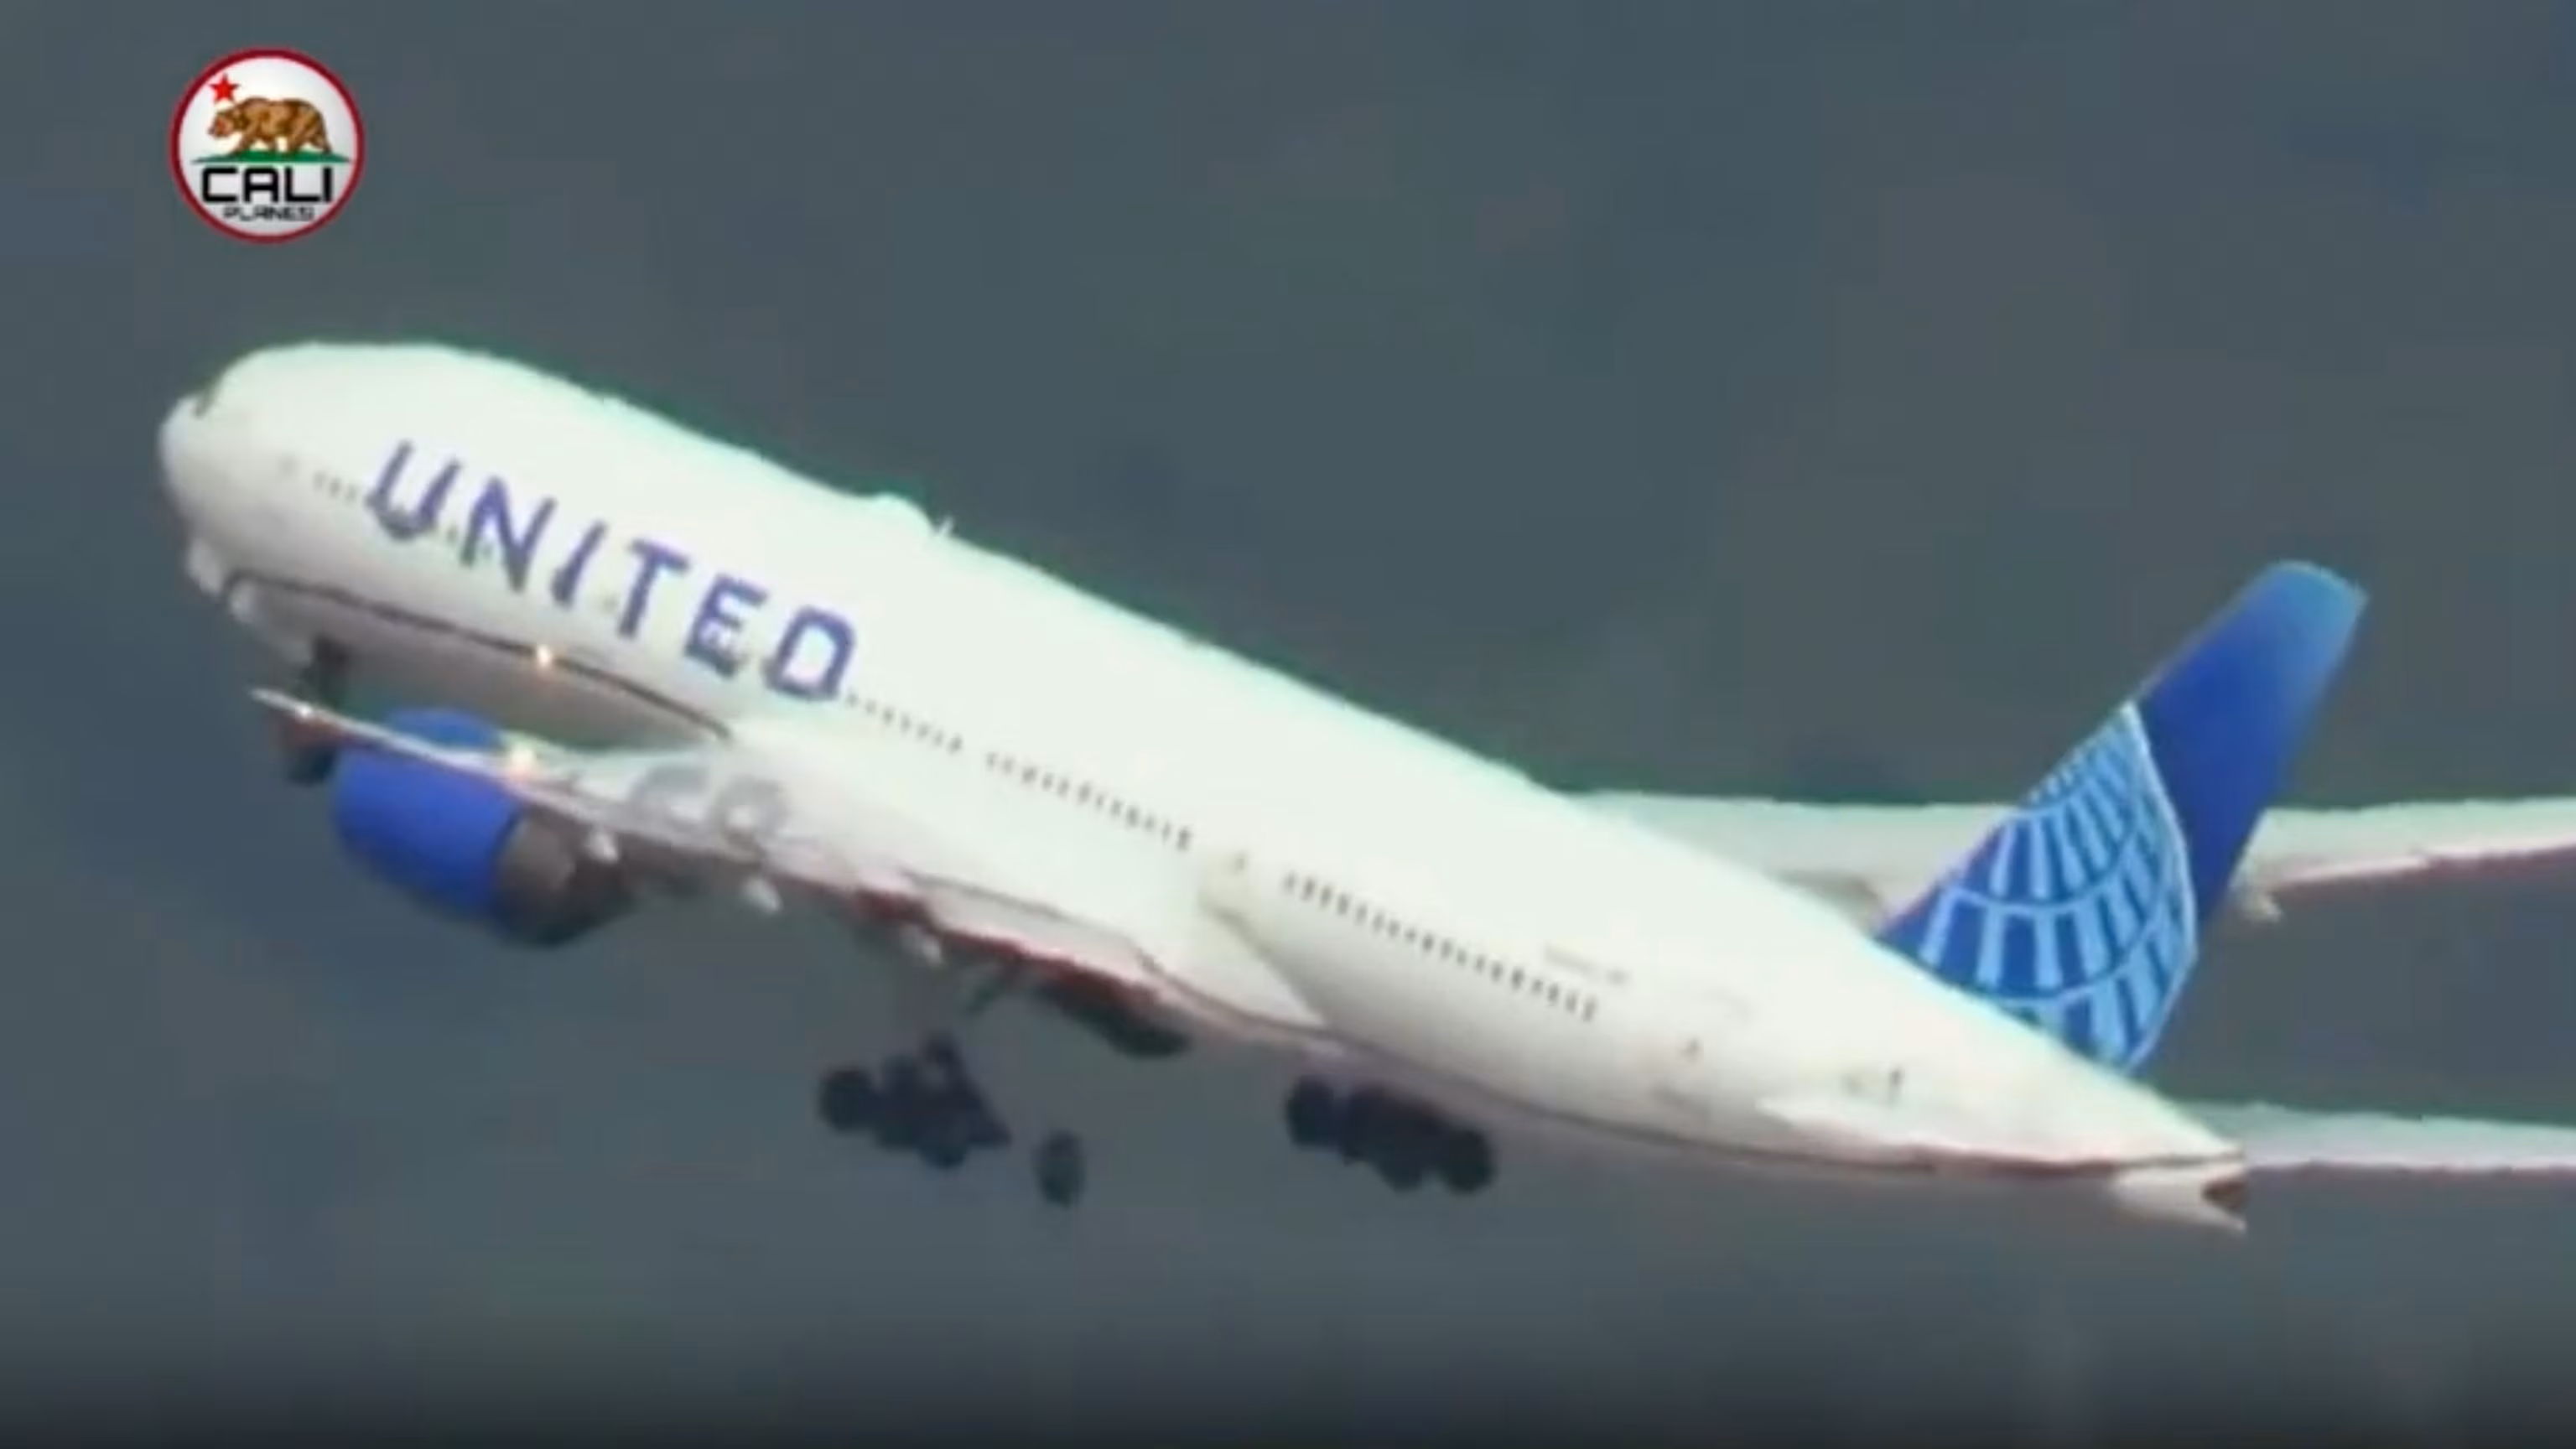 United Airlines Reviews: What to Know Before You Fly